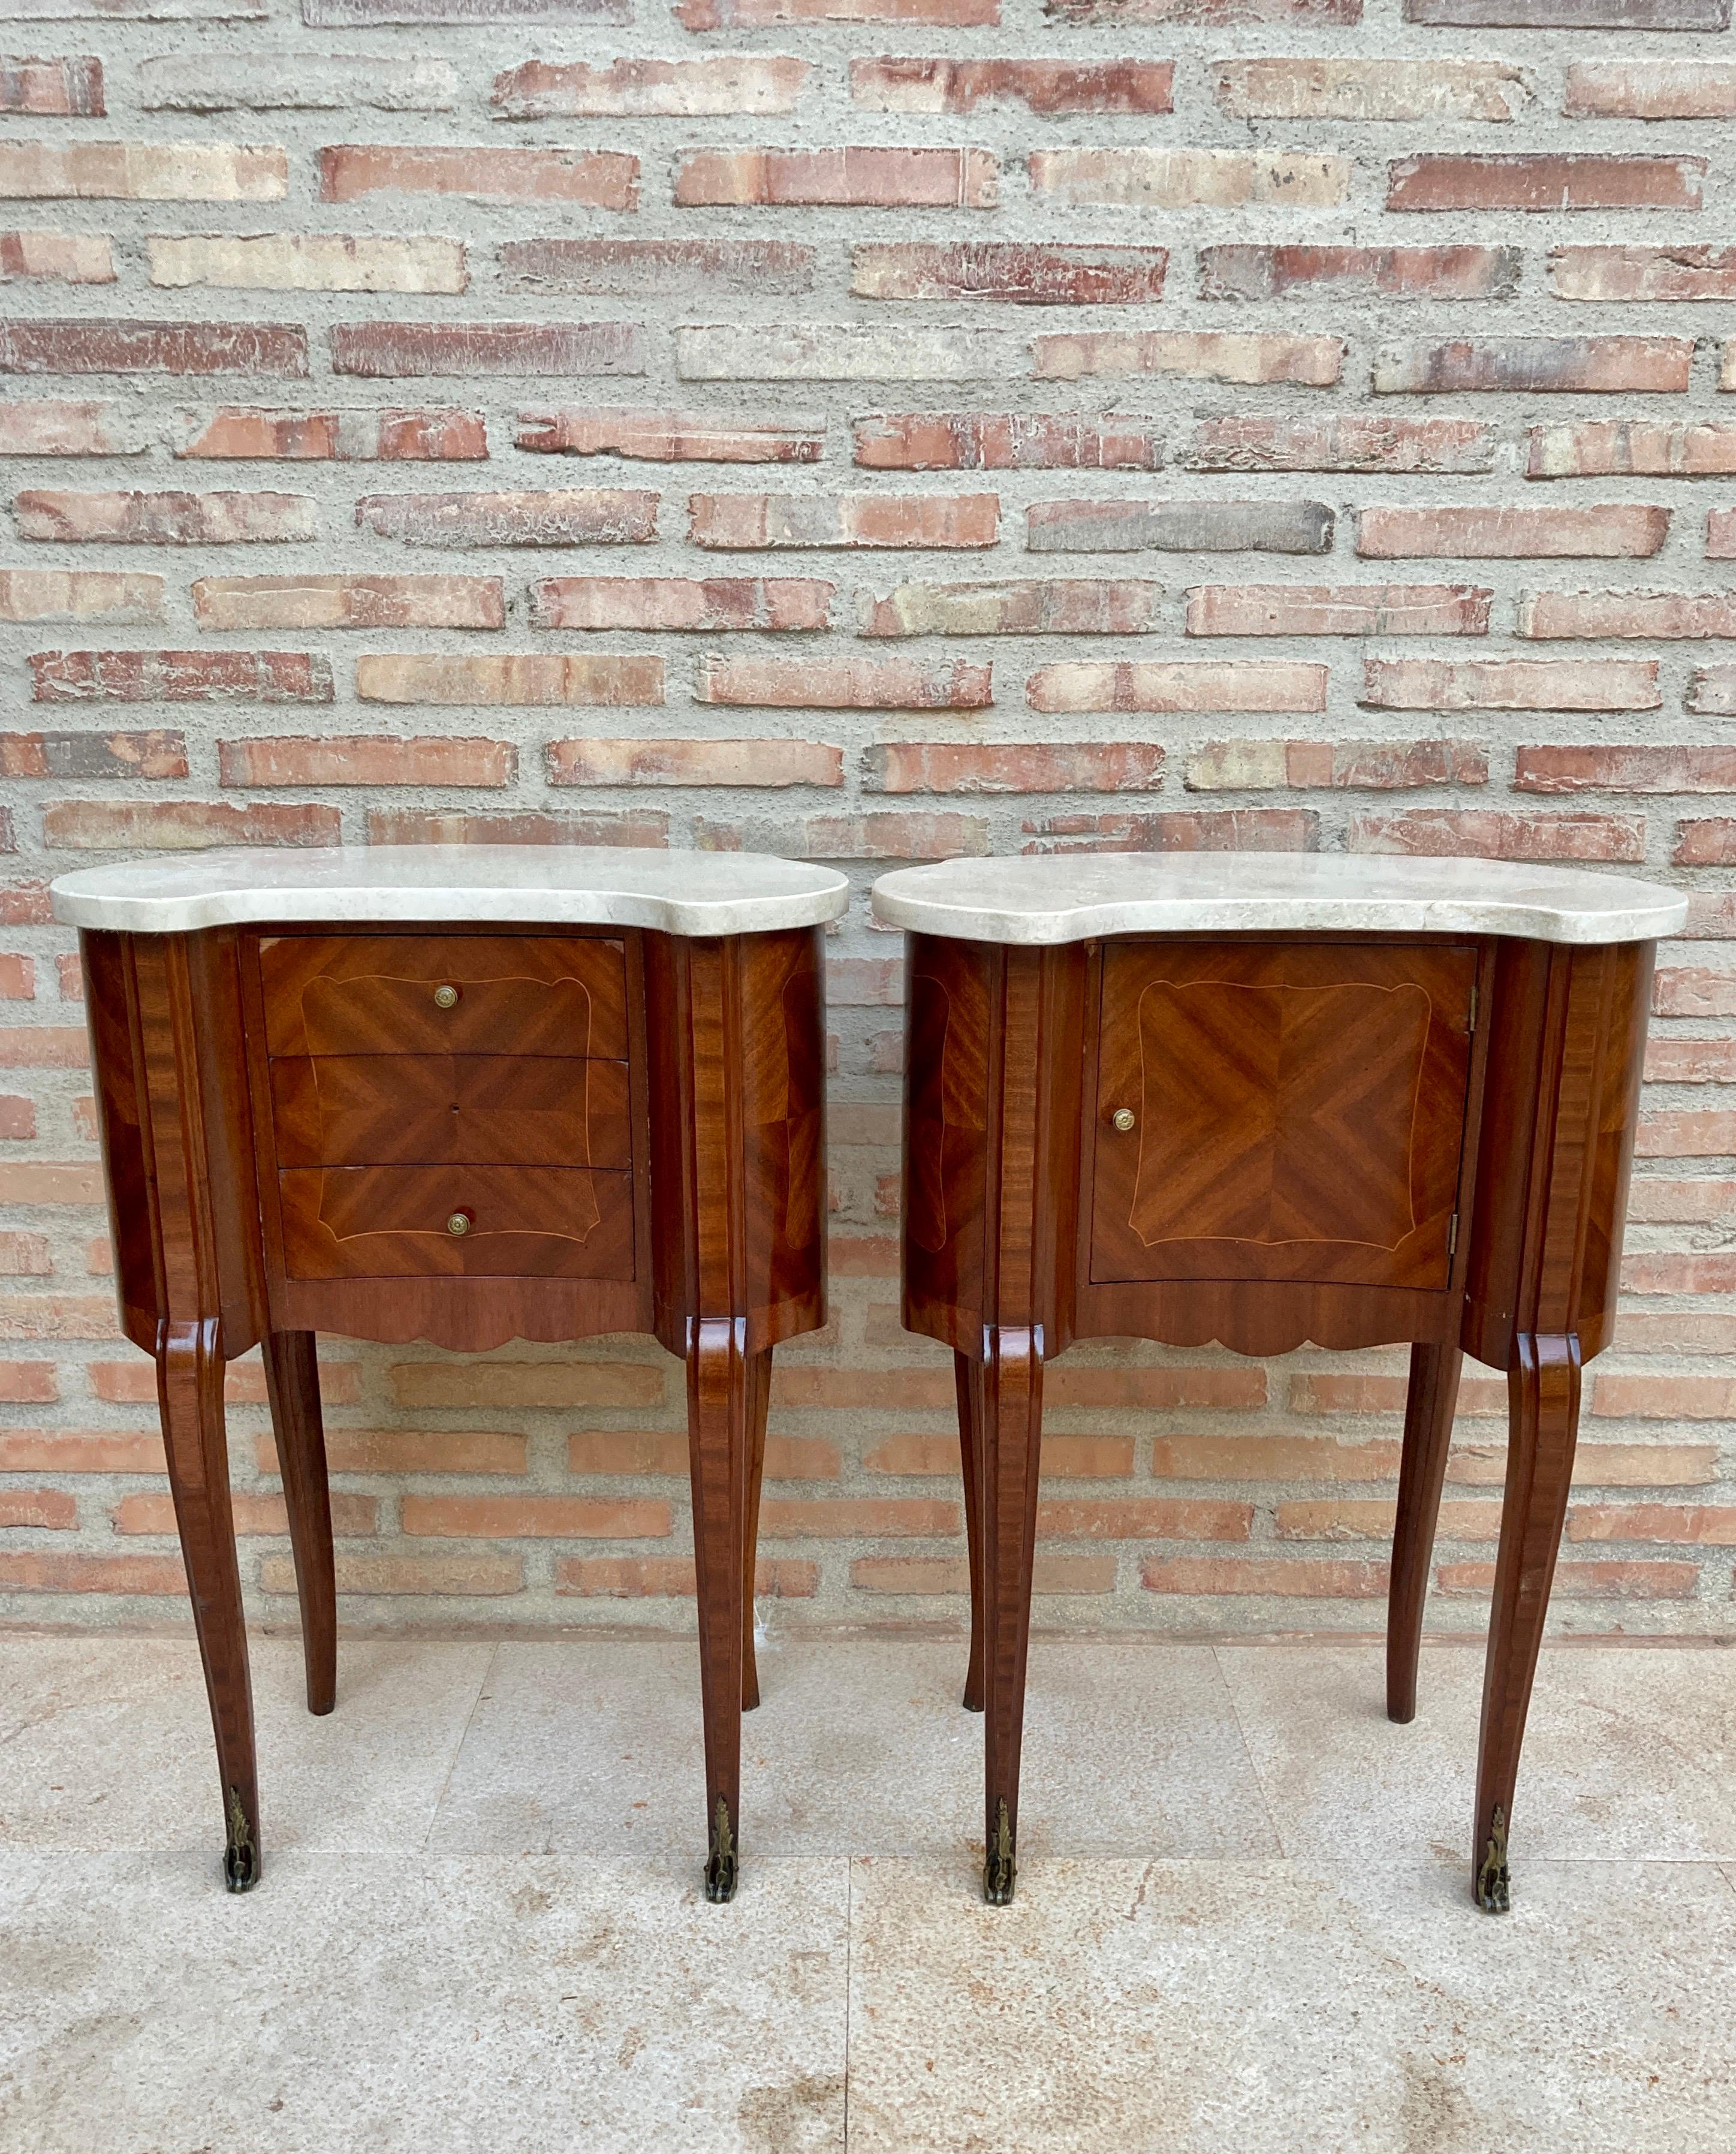 A stunning pair of antique marble top kidney shape side tables. These were made in France, they date from the 1900-1910 period.

Beautifully made from inlaid kingwood with floral marquetry, the quality of construction is excellent. The original